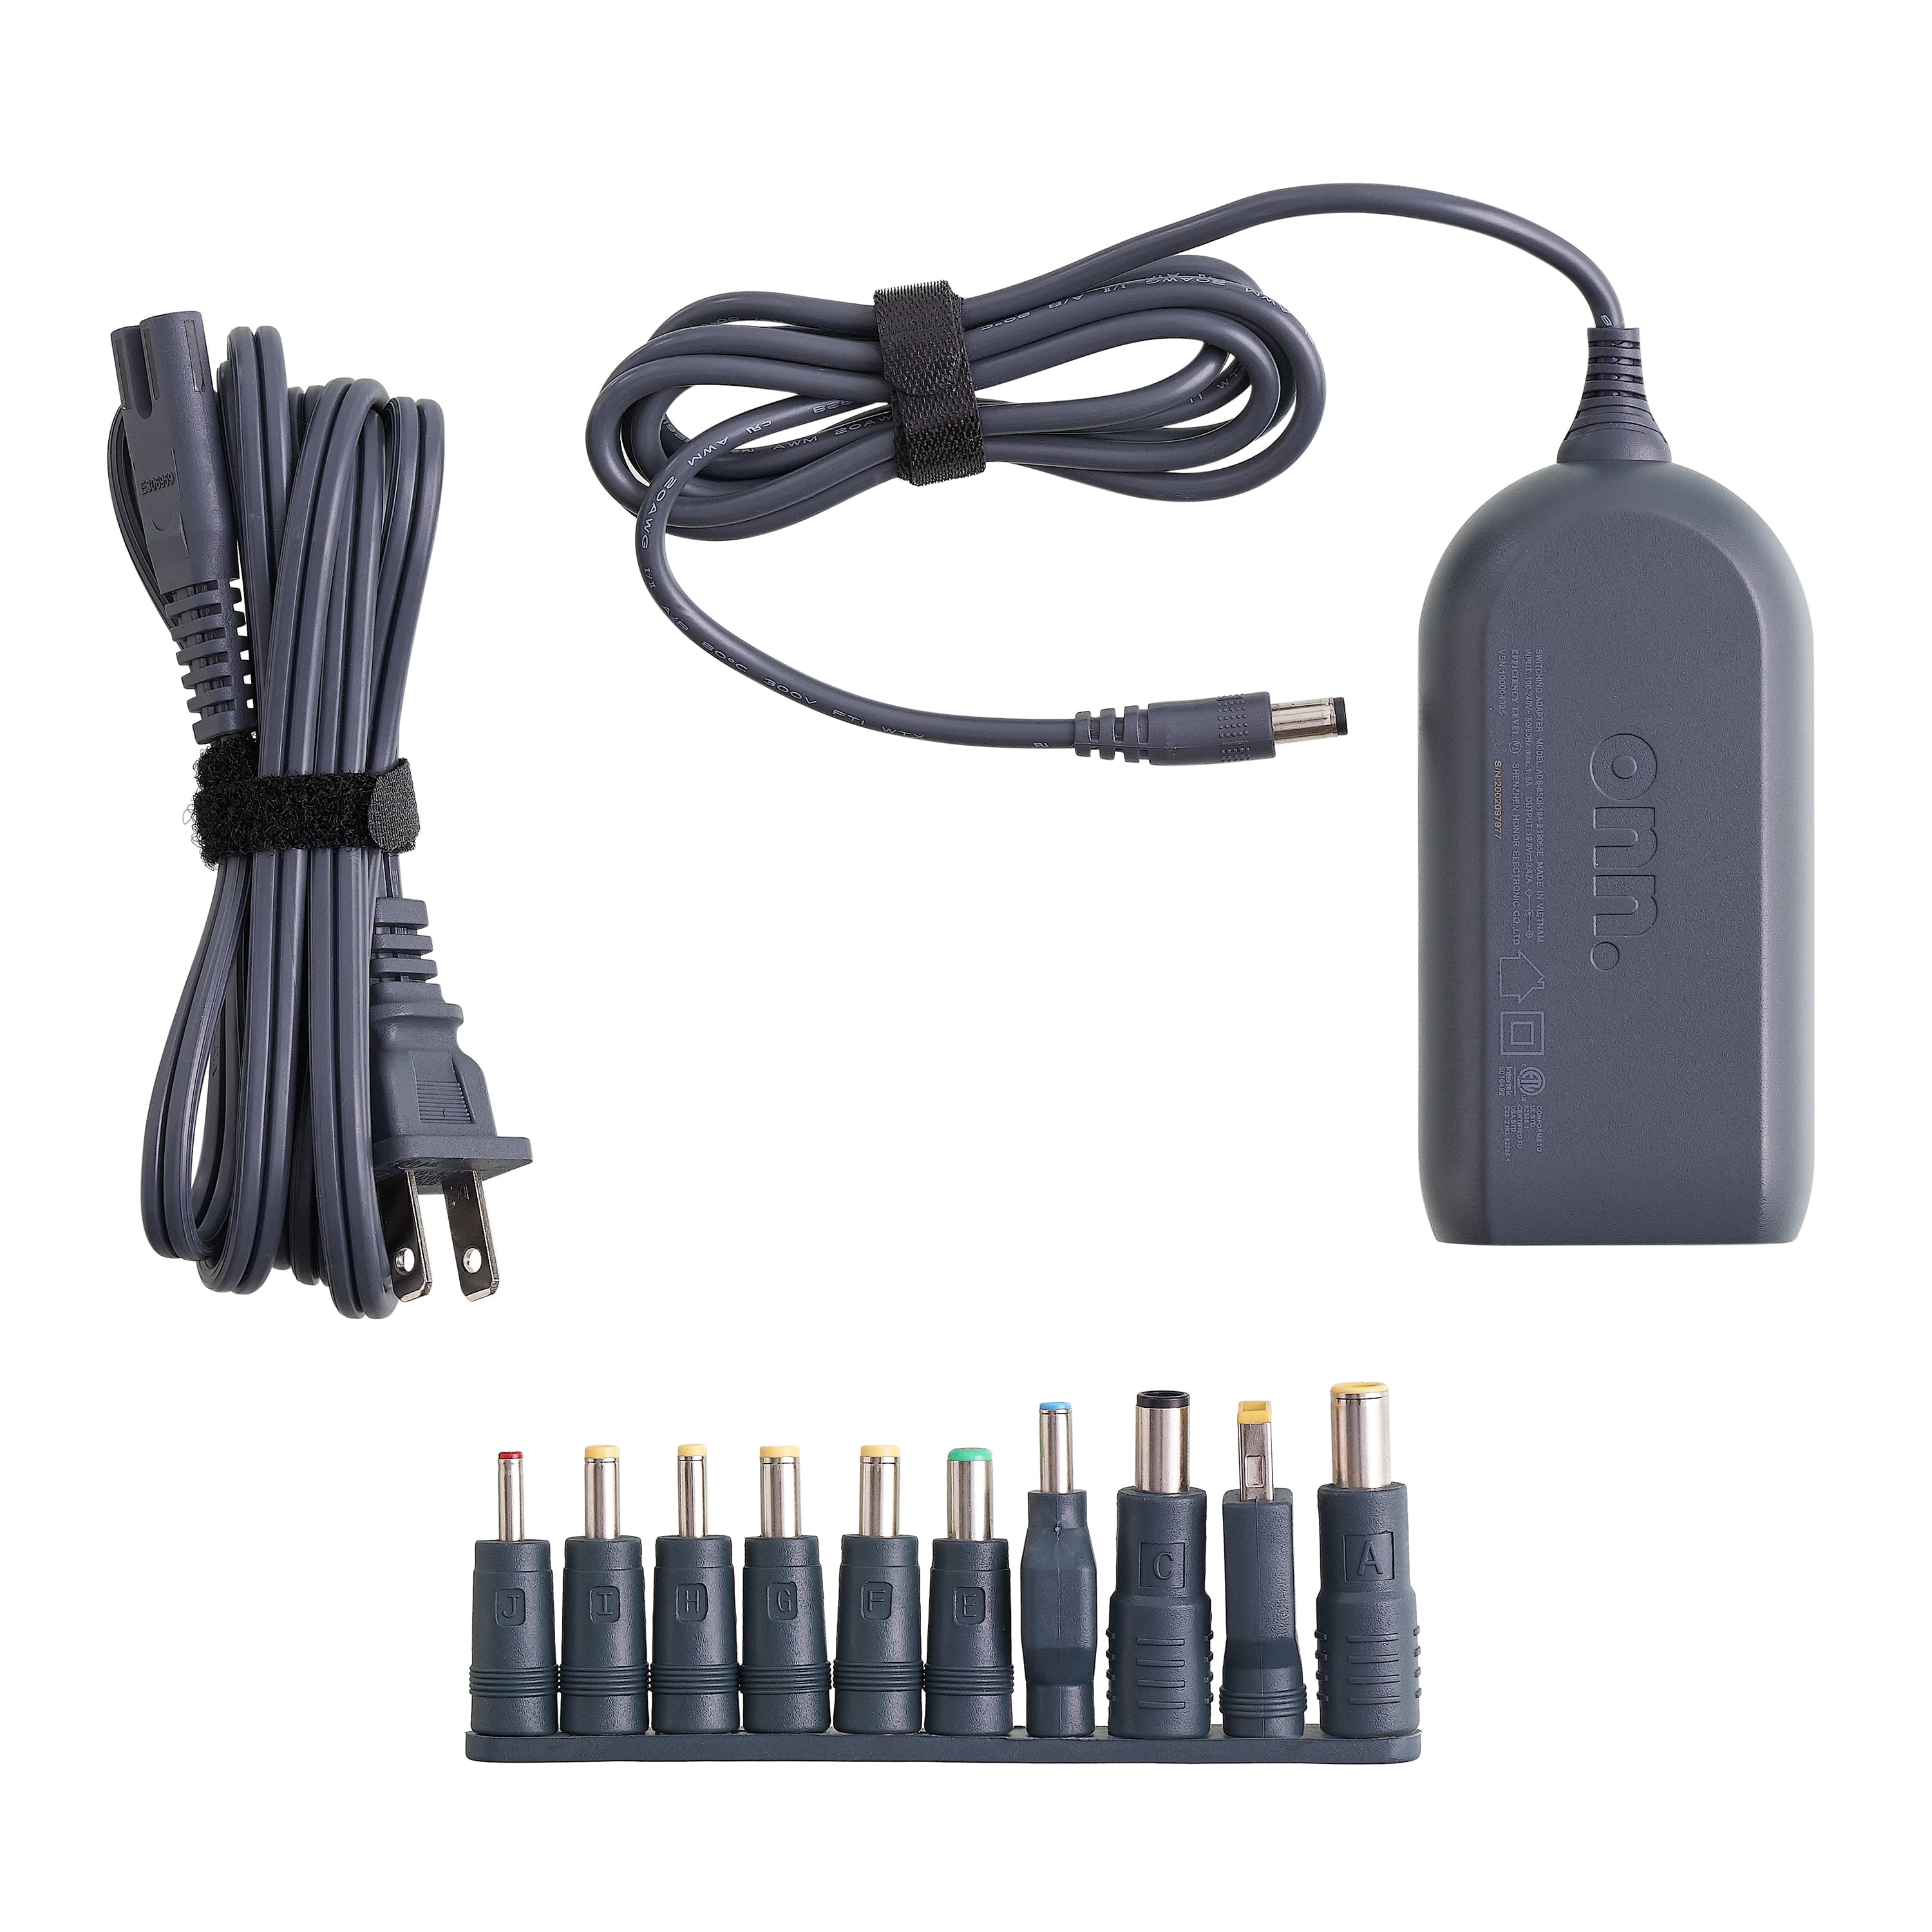 Laptop with 10 Interchangeable Tips, Total 10 Feet Power Cords, Most Laptops Like HP, Dell, Lenovo, onn. - Walmart.com